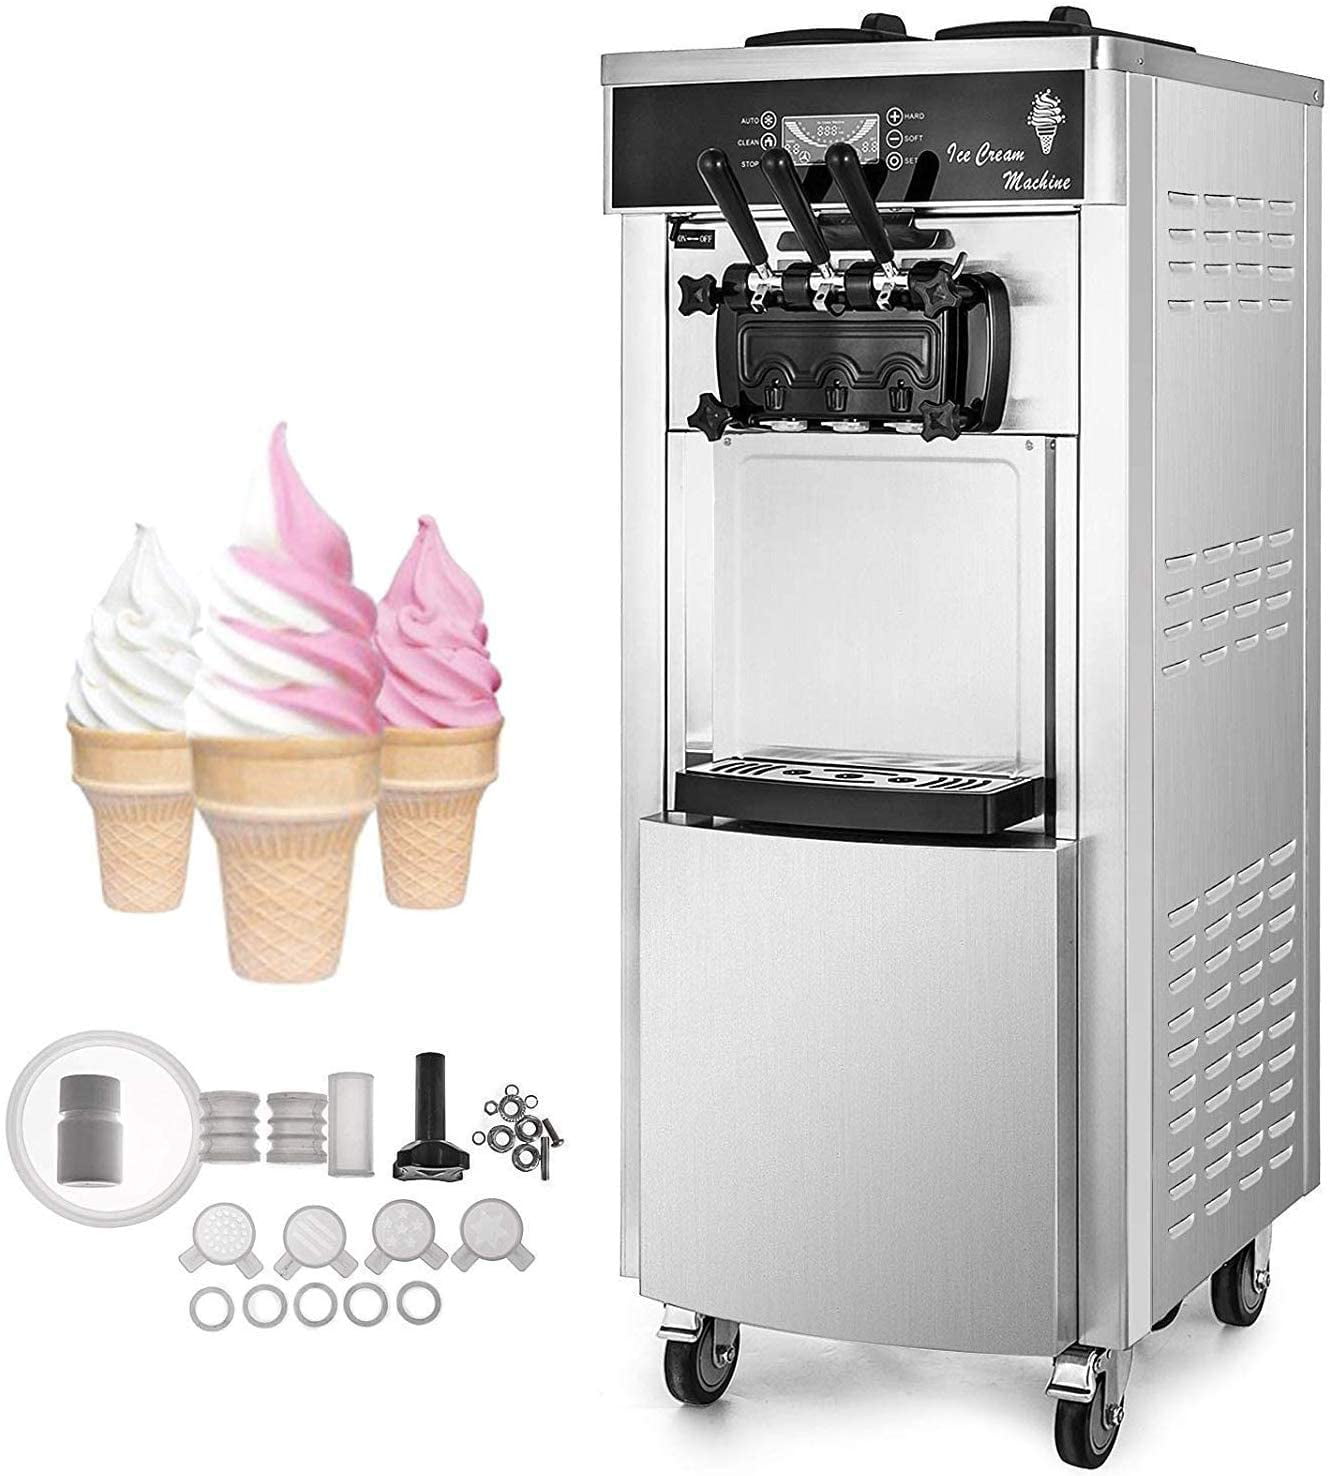 Vevor 2200w Commercial Soft Ice Cream Machine 5 3 To 7 4 Gallons Per